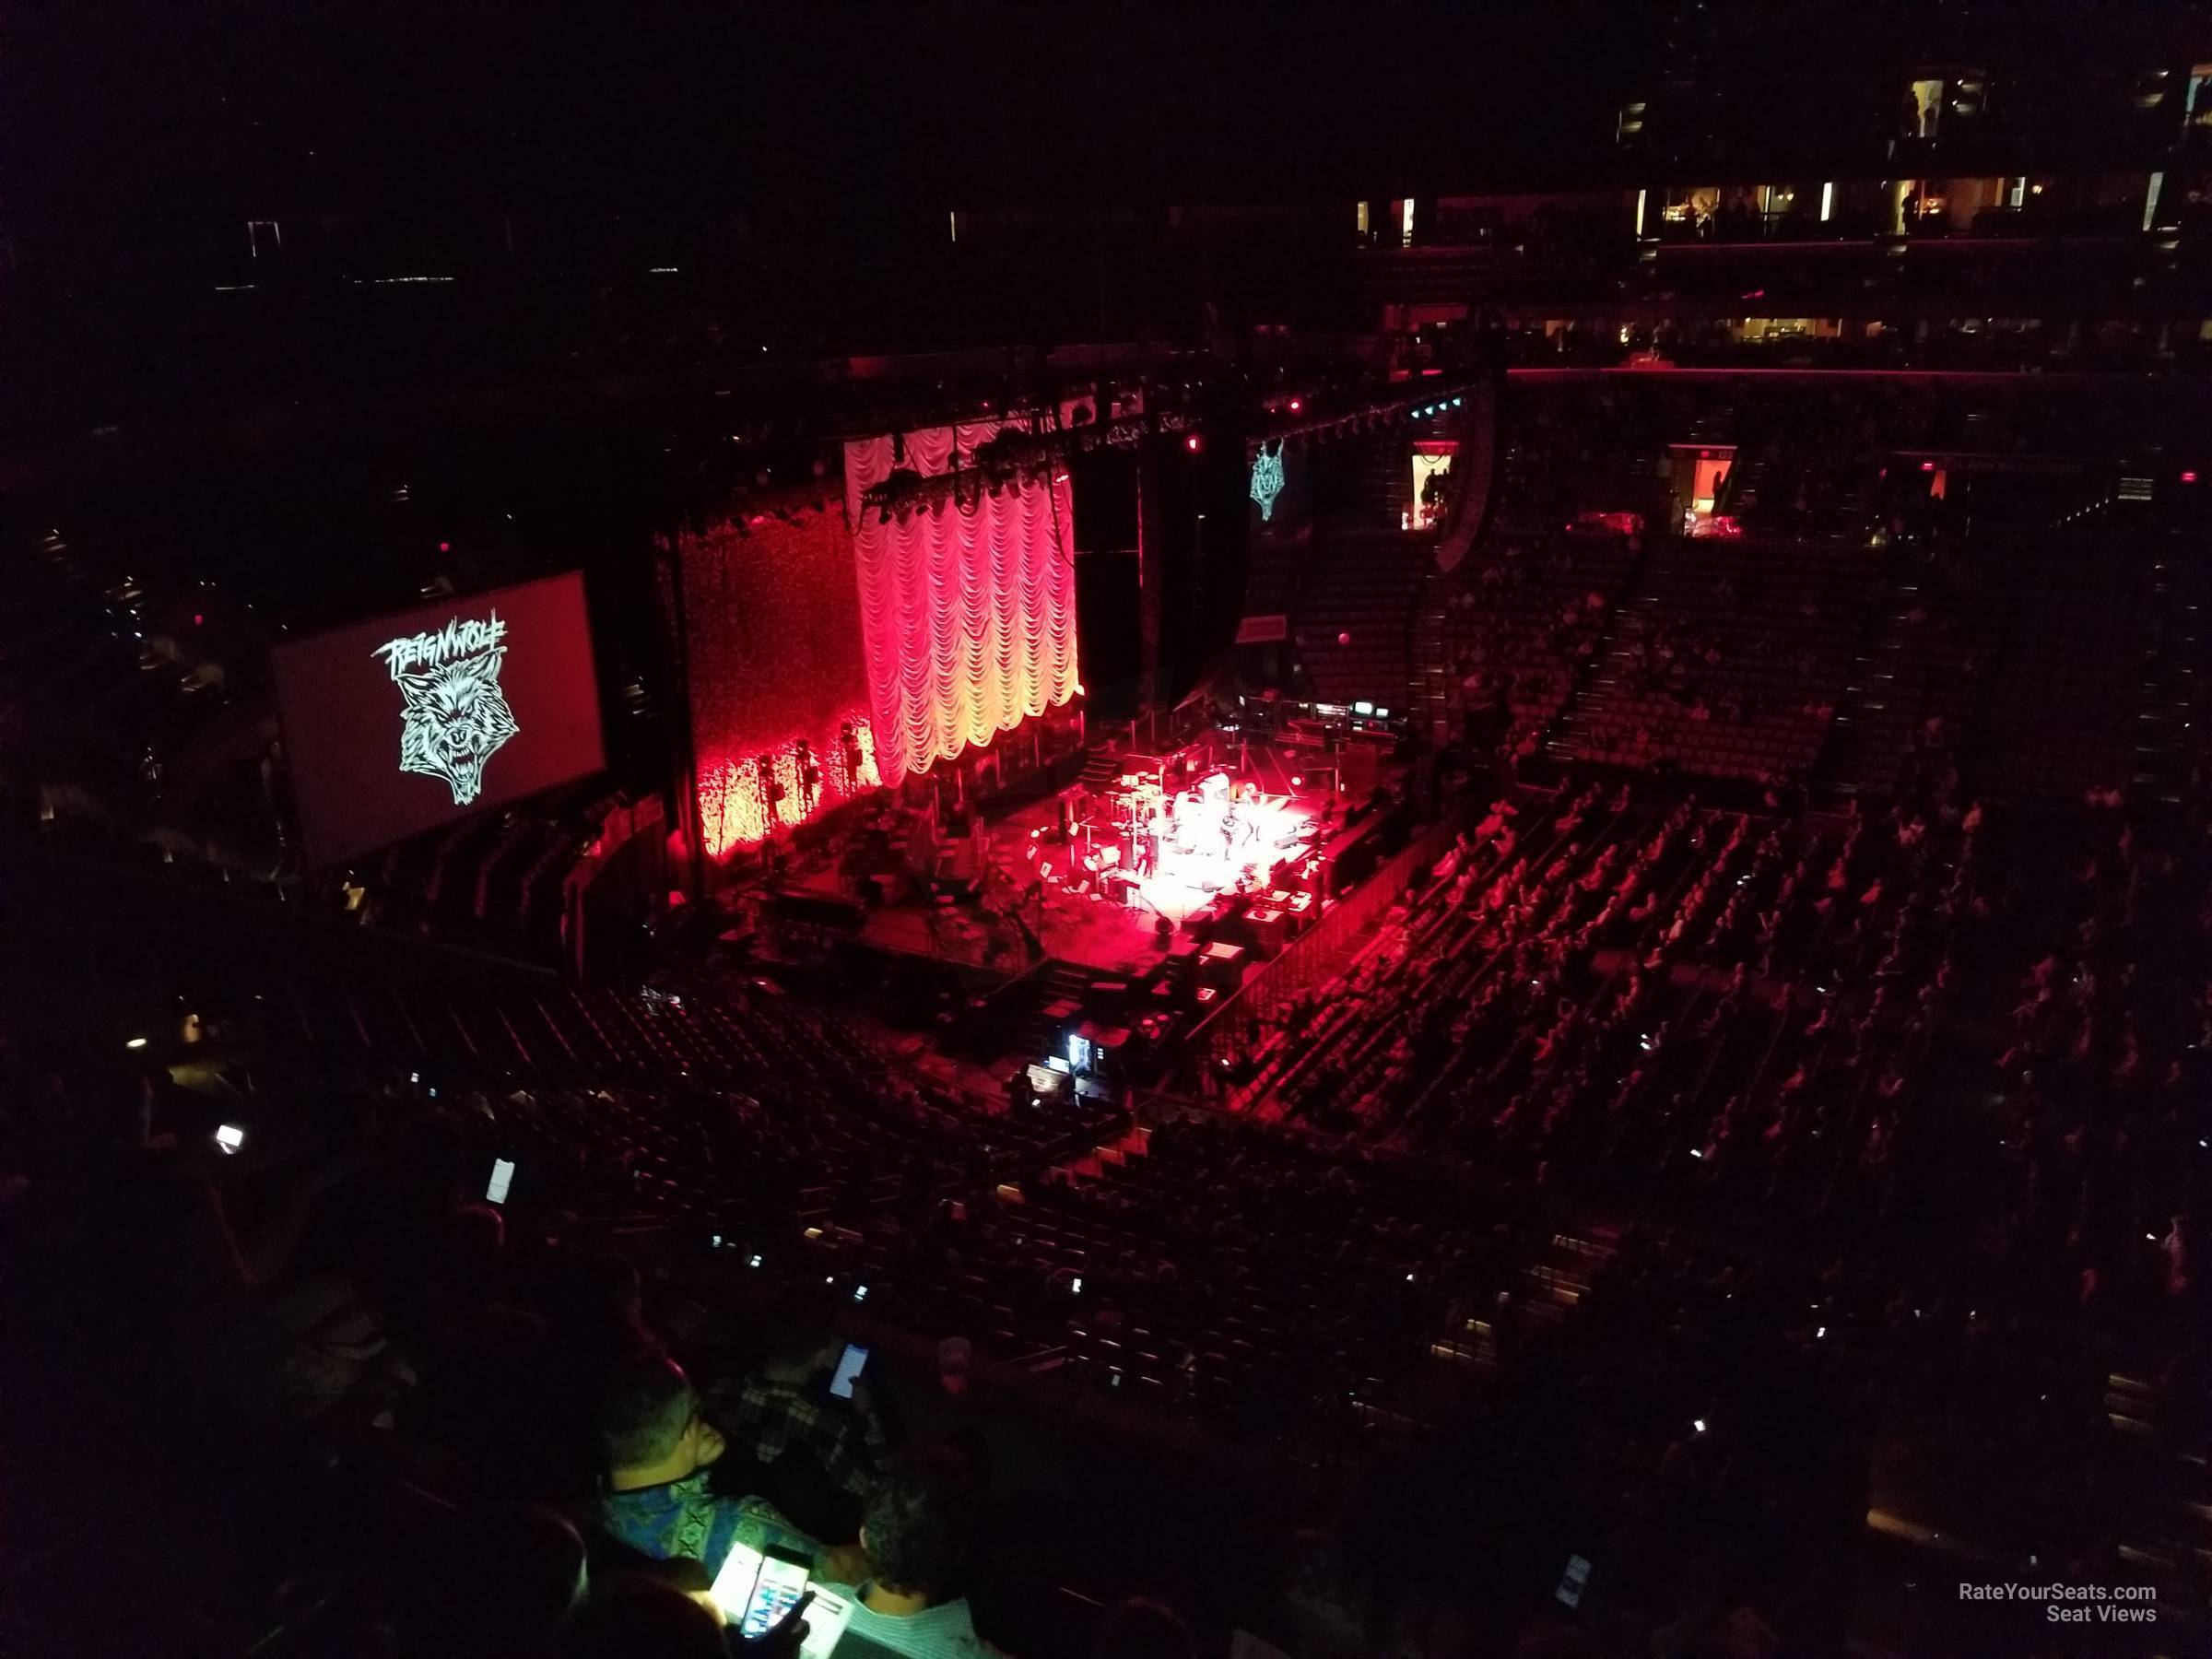 club c19, row 3 seat view  for concert - amerant bank arena